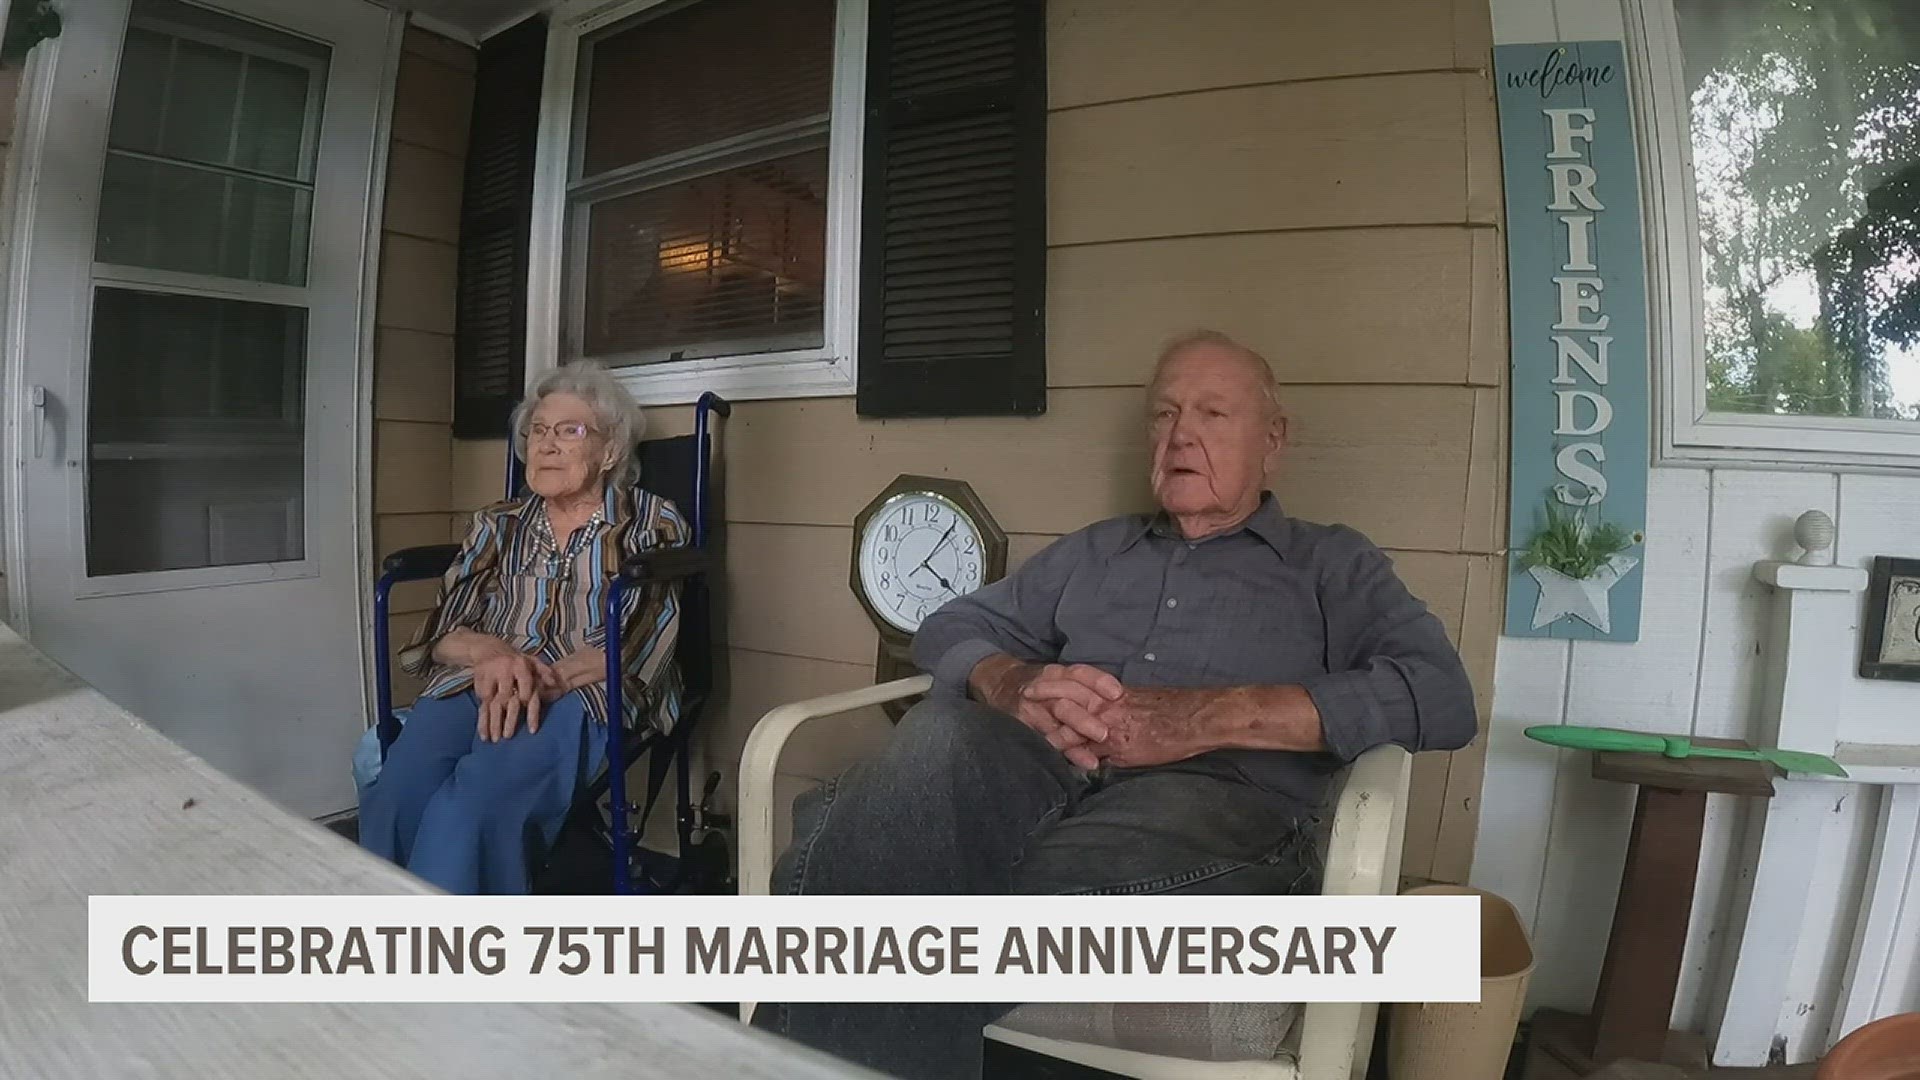 In 1948, a then 20-year-old Jim Tack married 18-year-old Iona. 75 years later, the two say their marriage hasn't changed one bit.